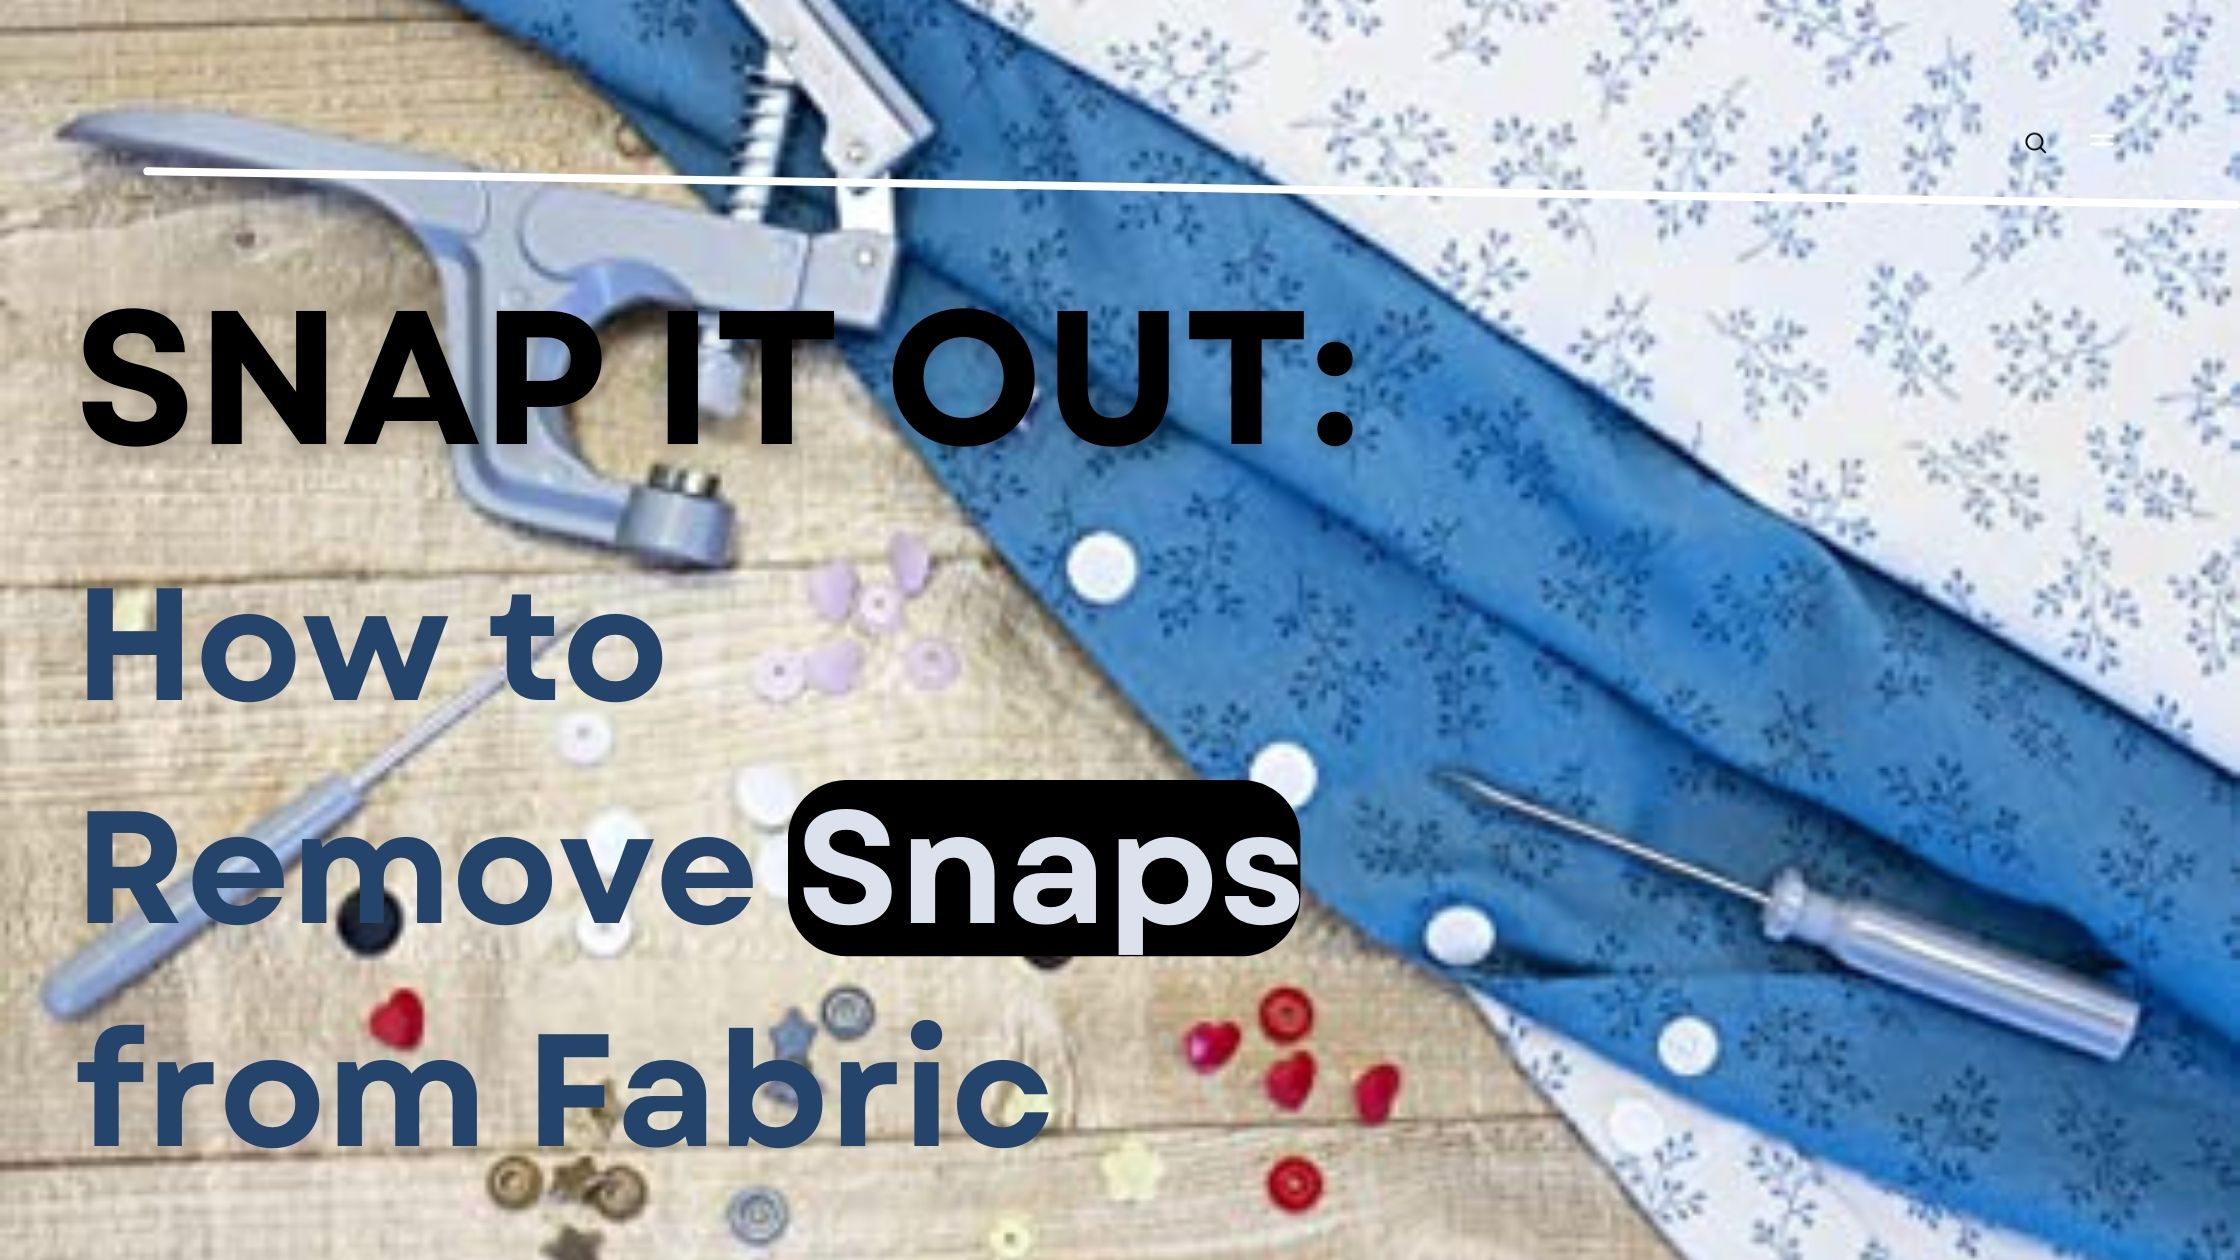 How To Remove Snaps From Fabric